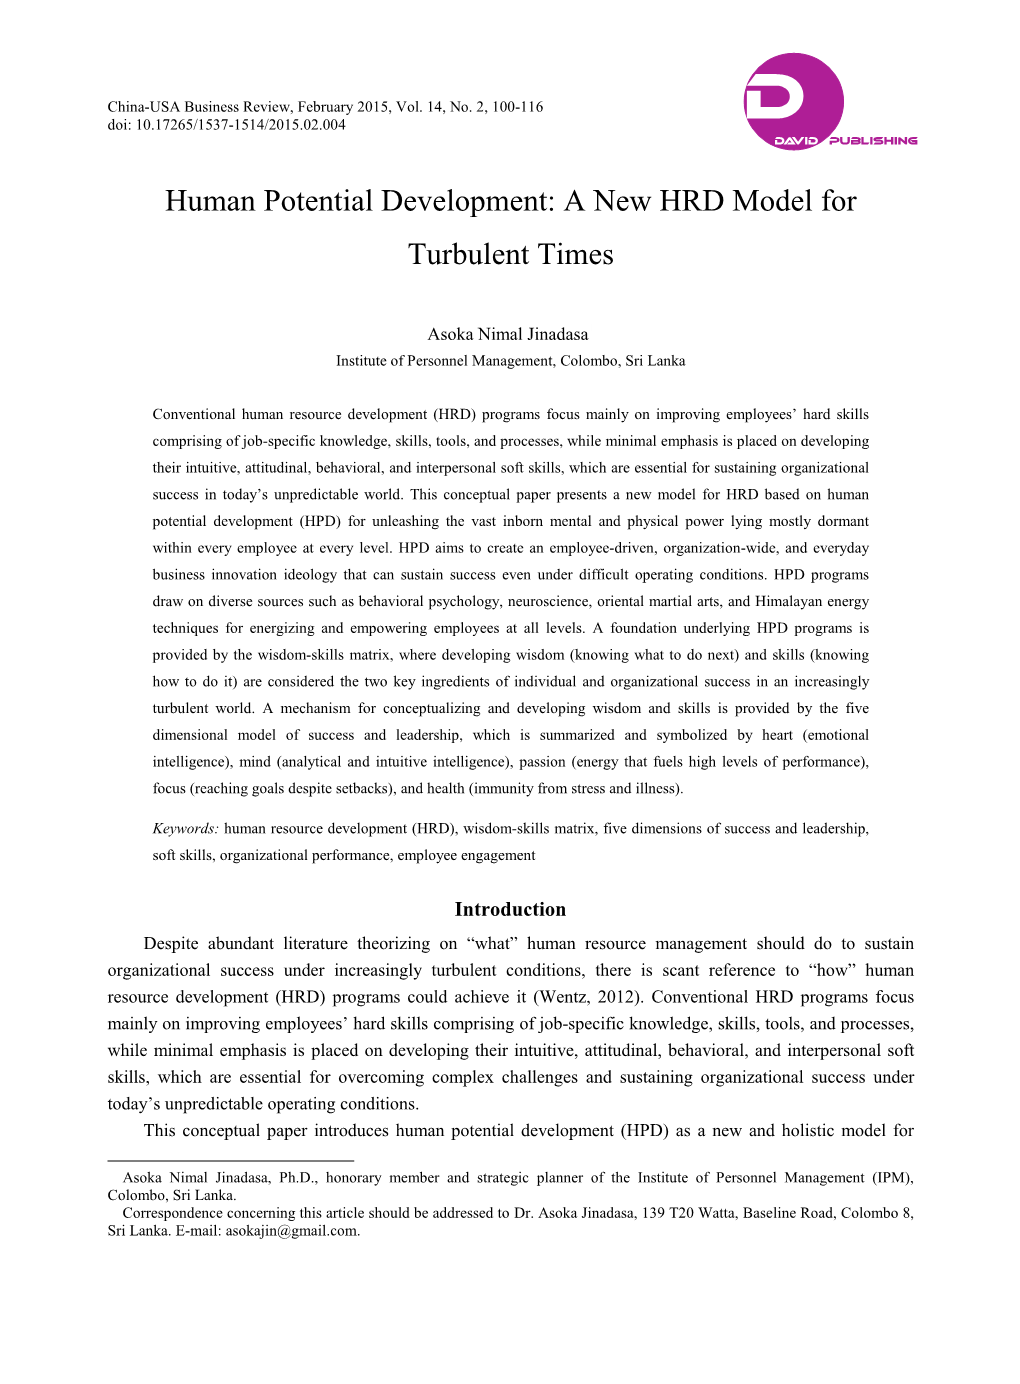 Human Potential Development: a New HRD Model for Turbulent Times